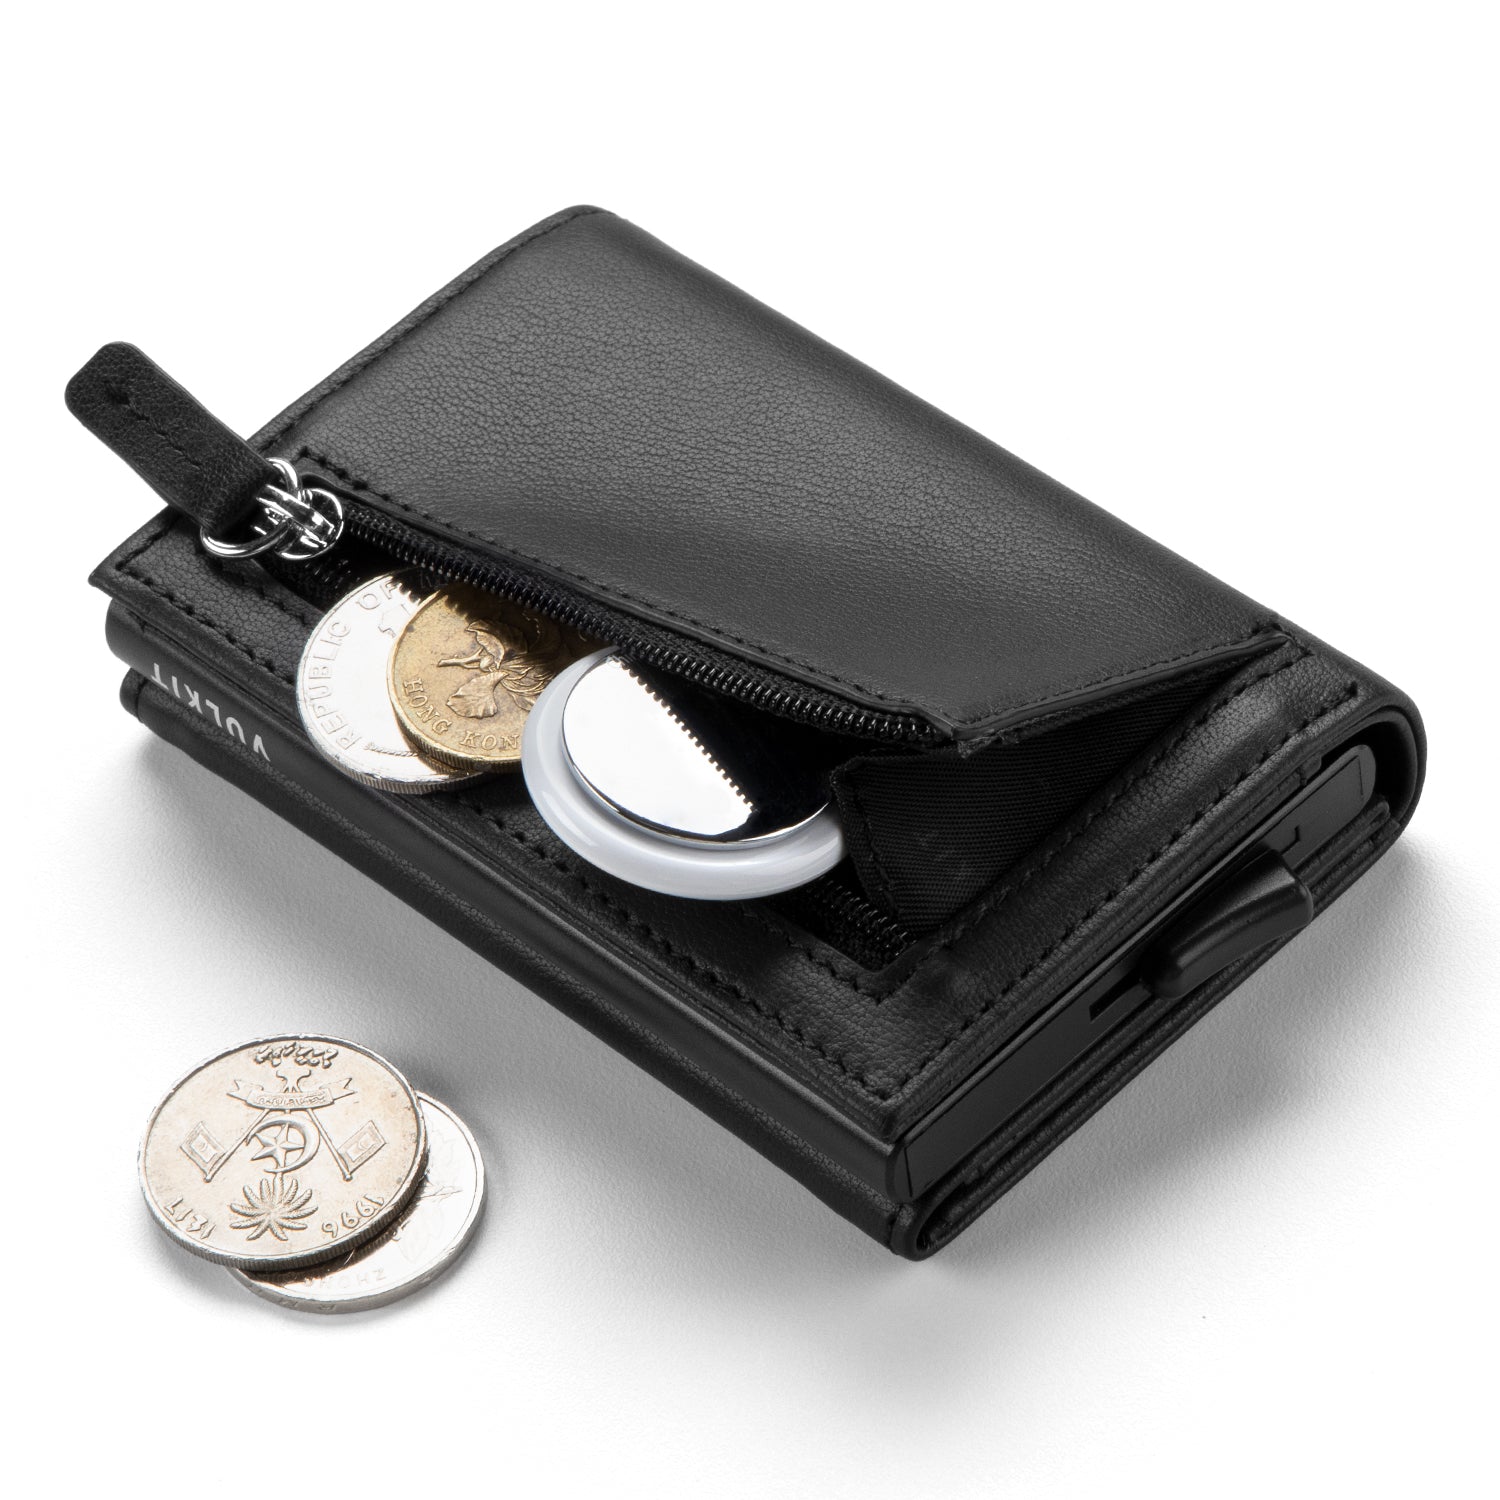 LV and GG magnetic money clip wallets – Big Will Made It